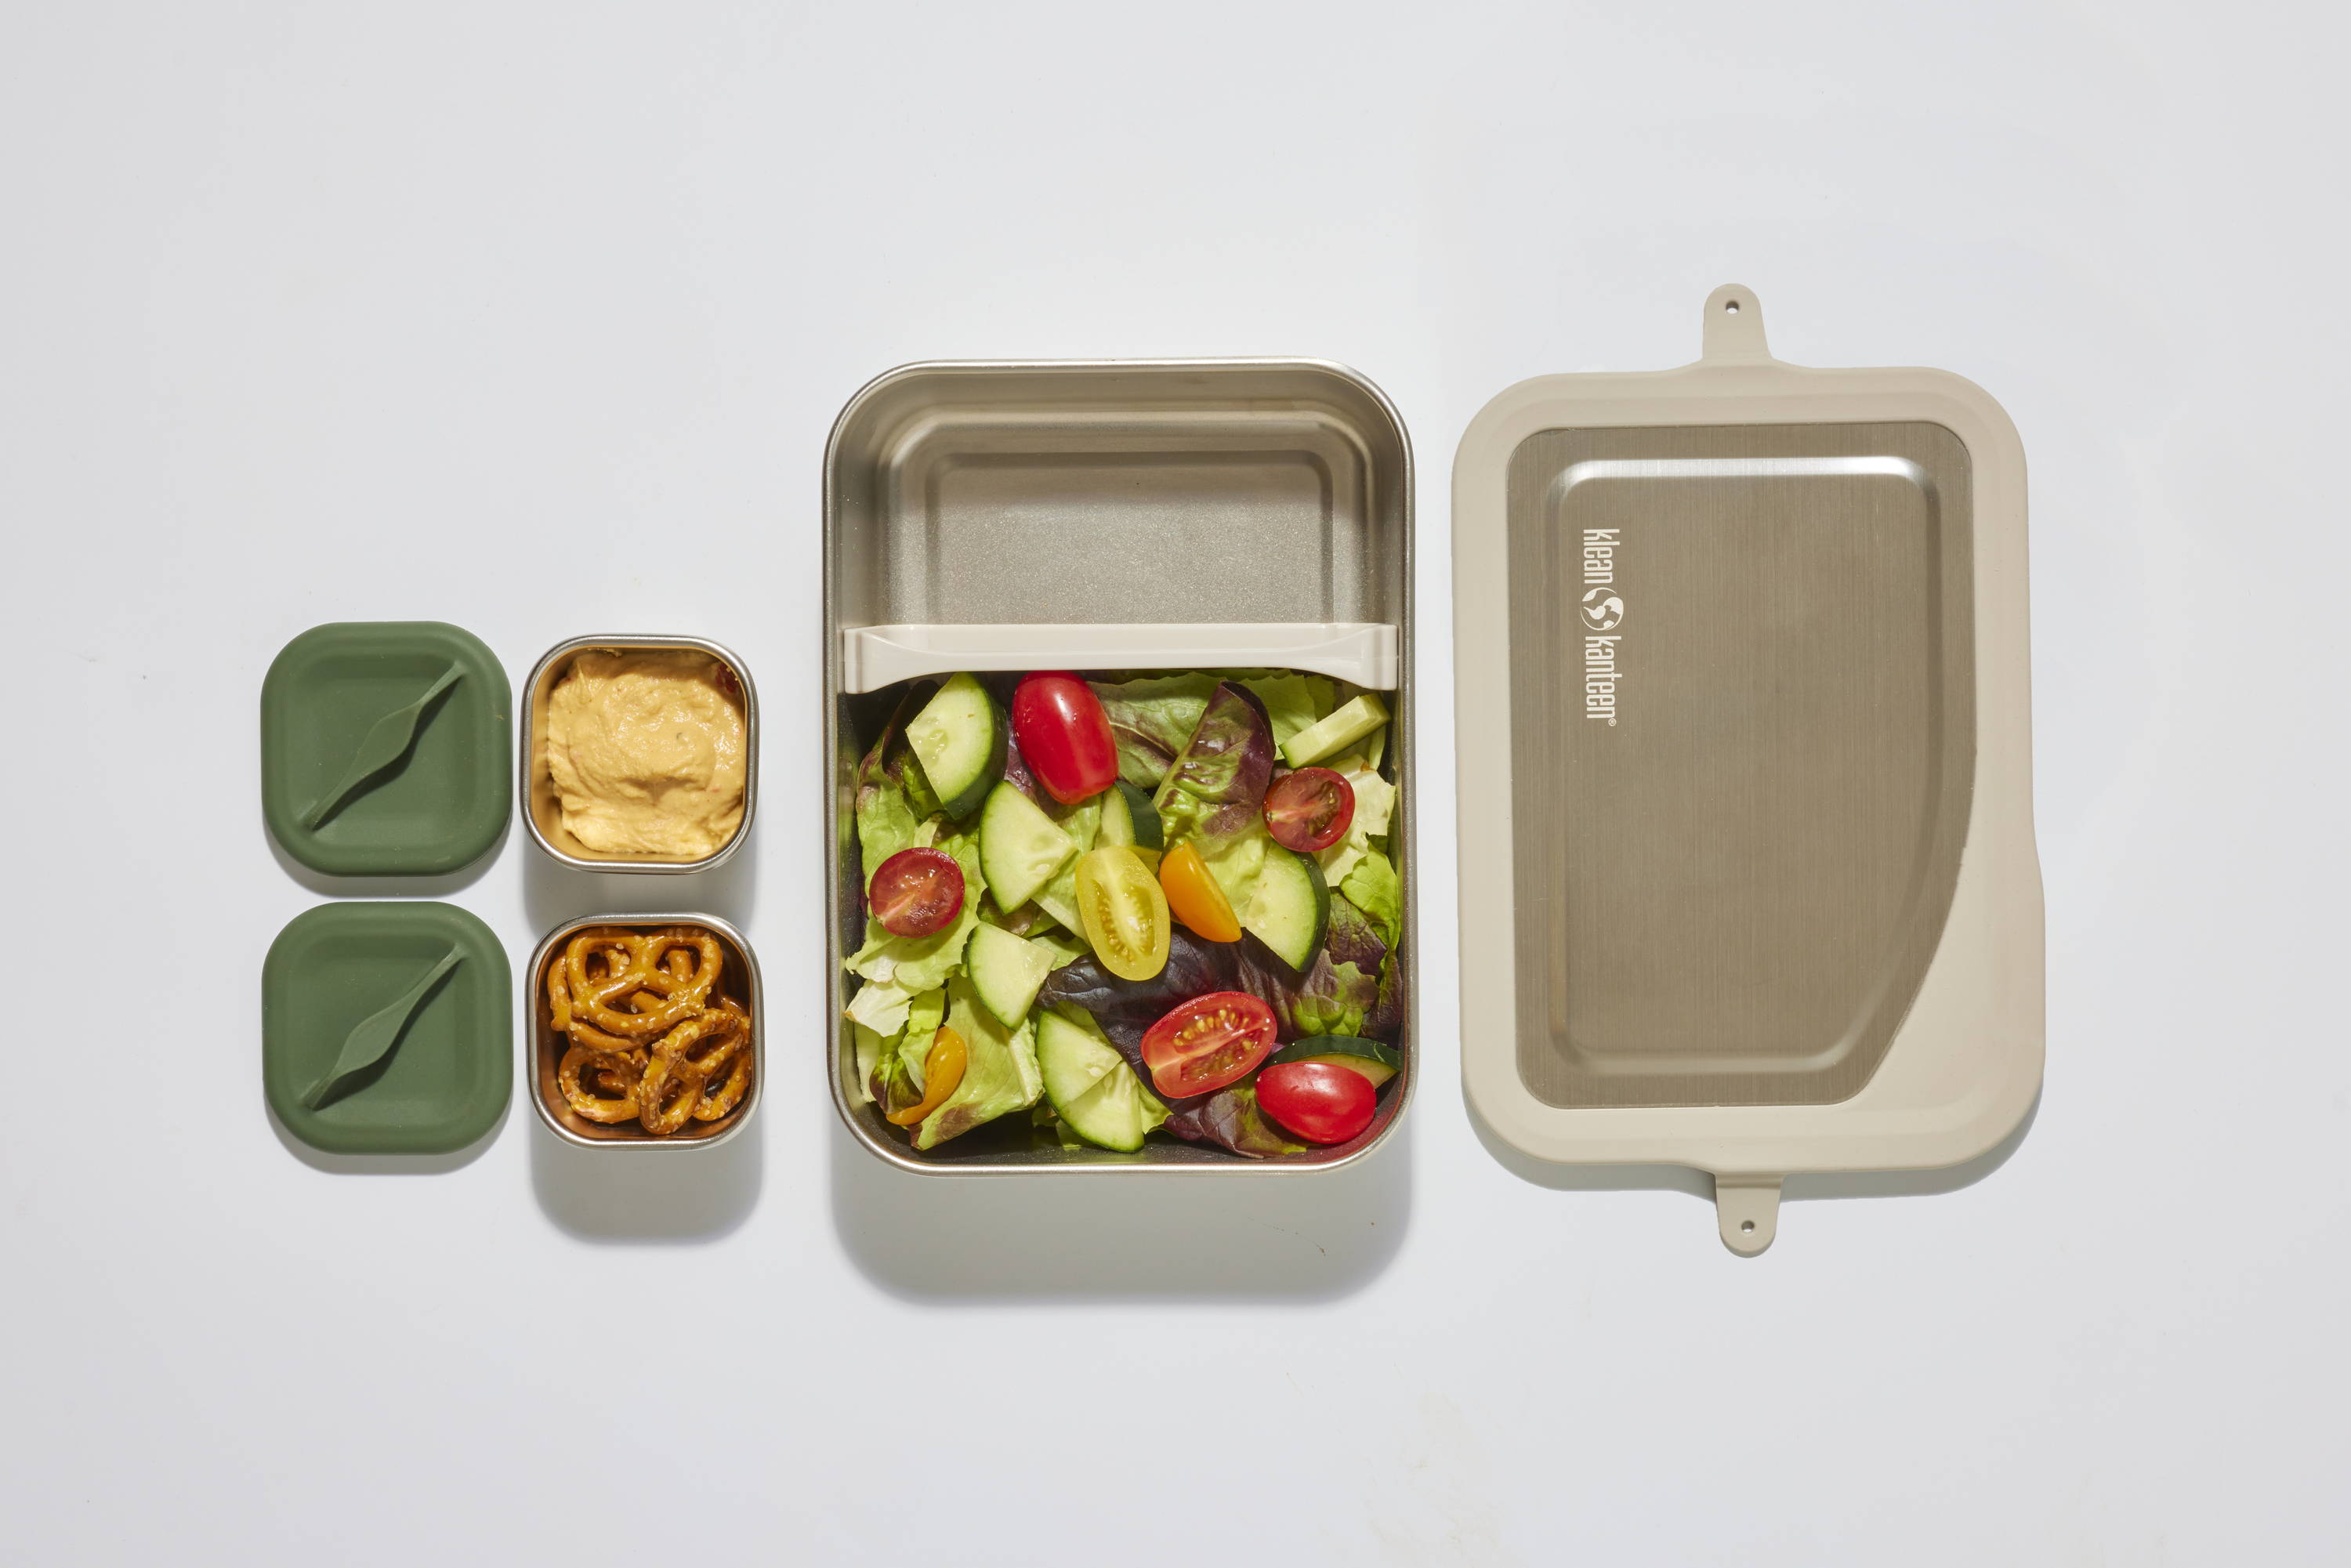 Steel lunch box with divider and snacks